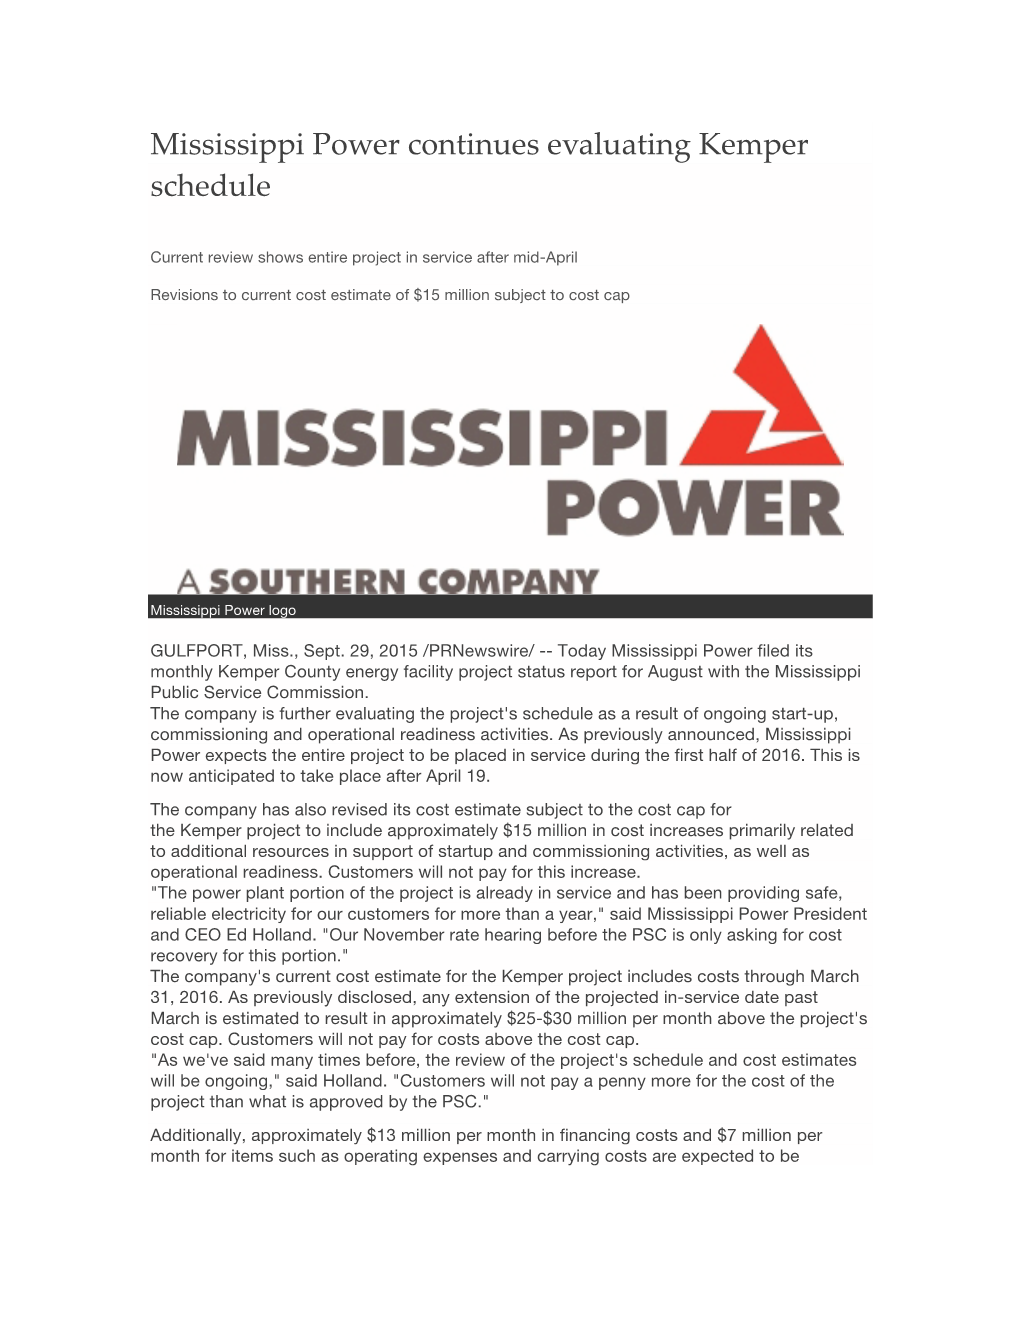 Mississippi Power Continues Evaluating Kemper Schedule